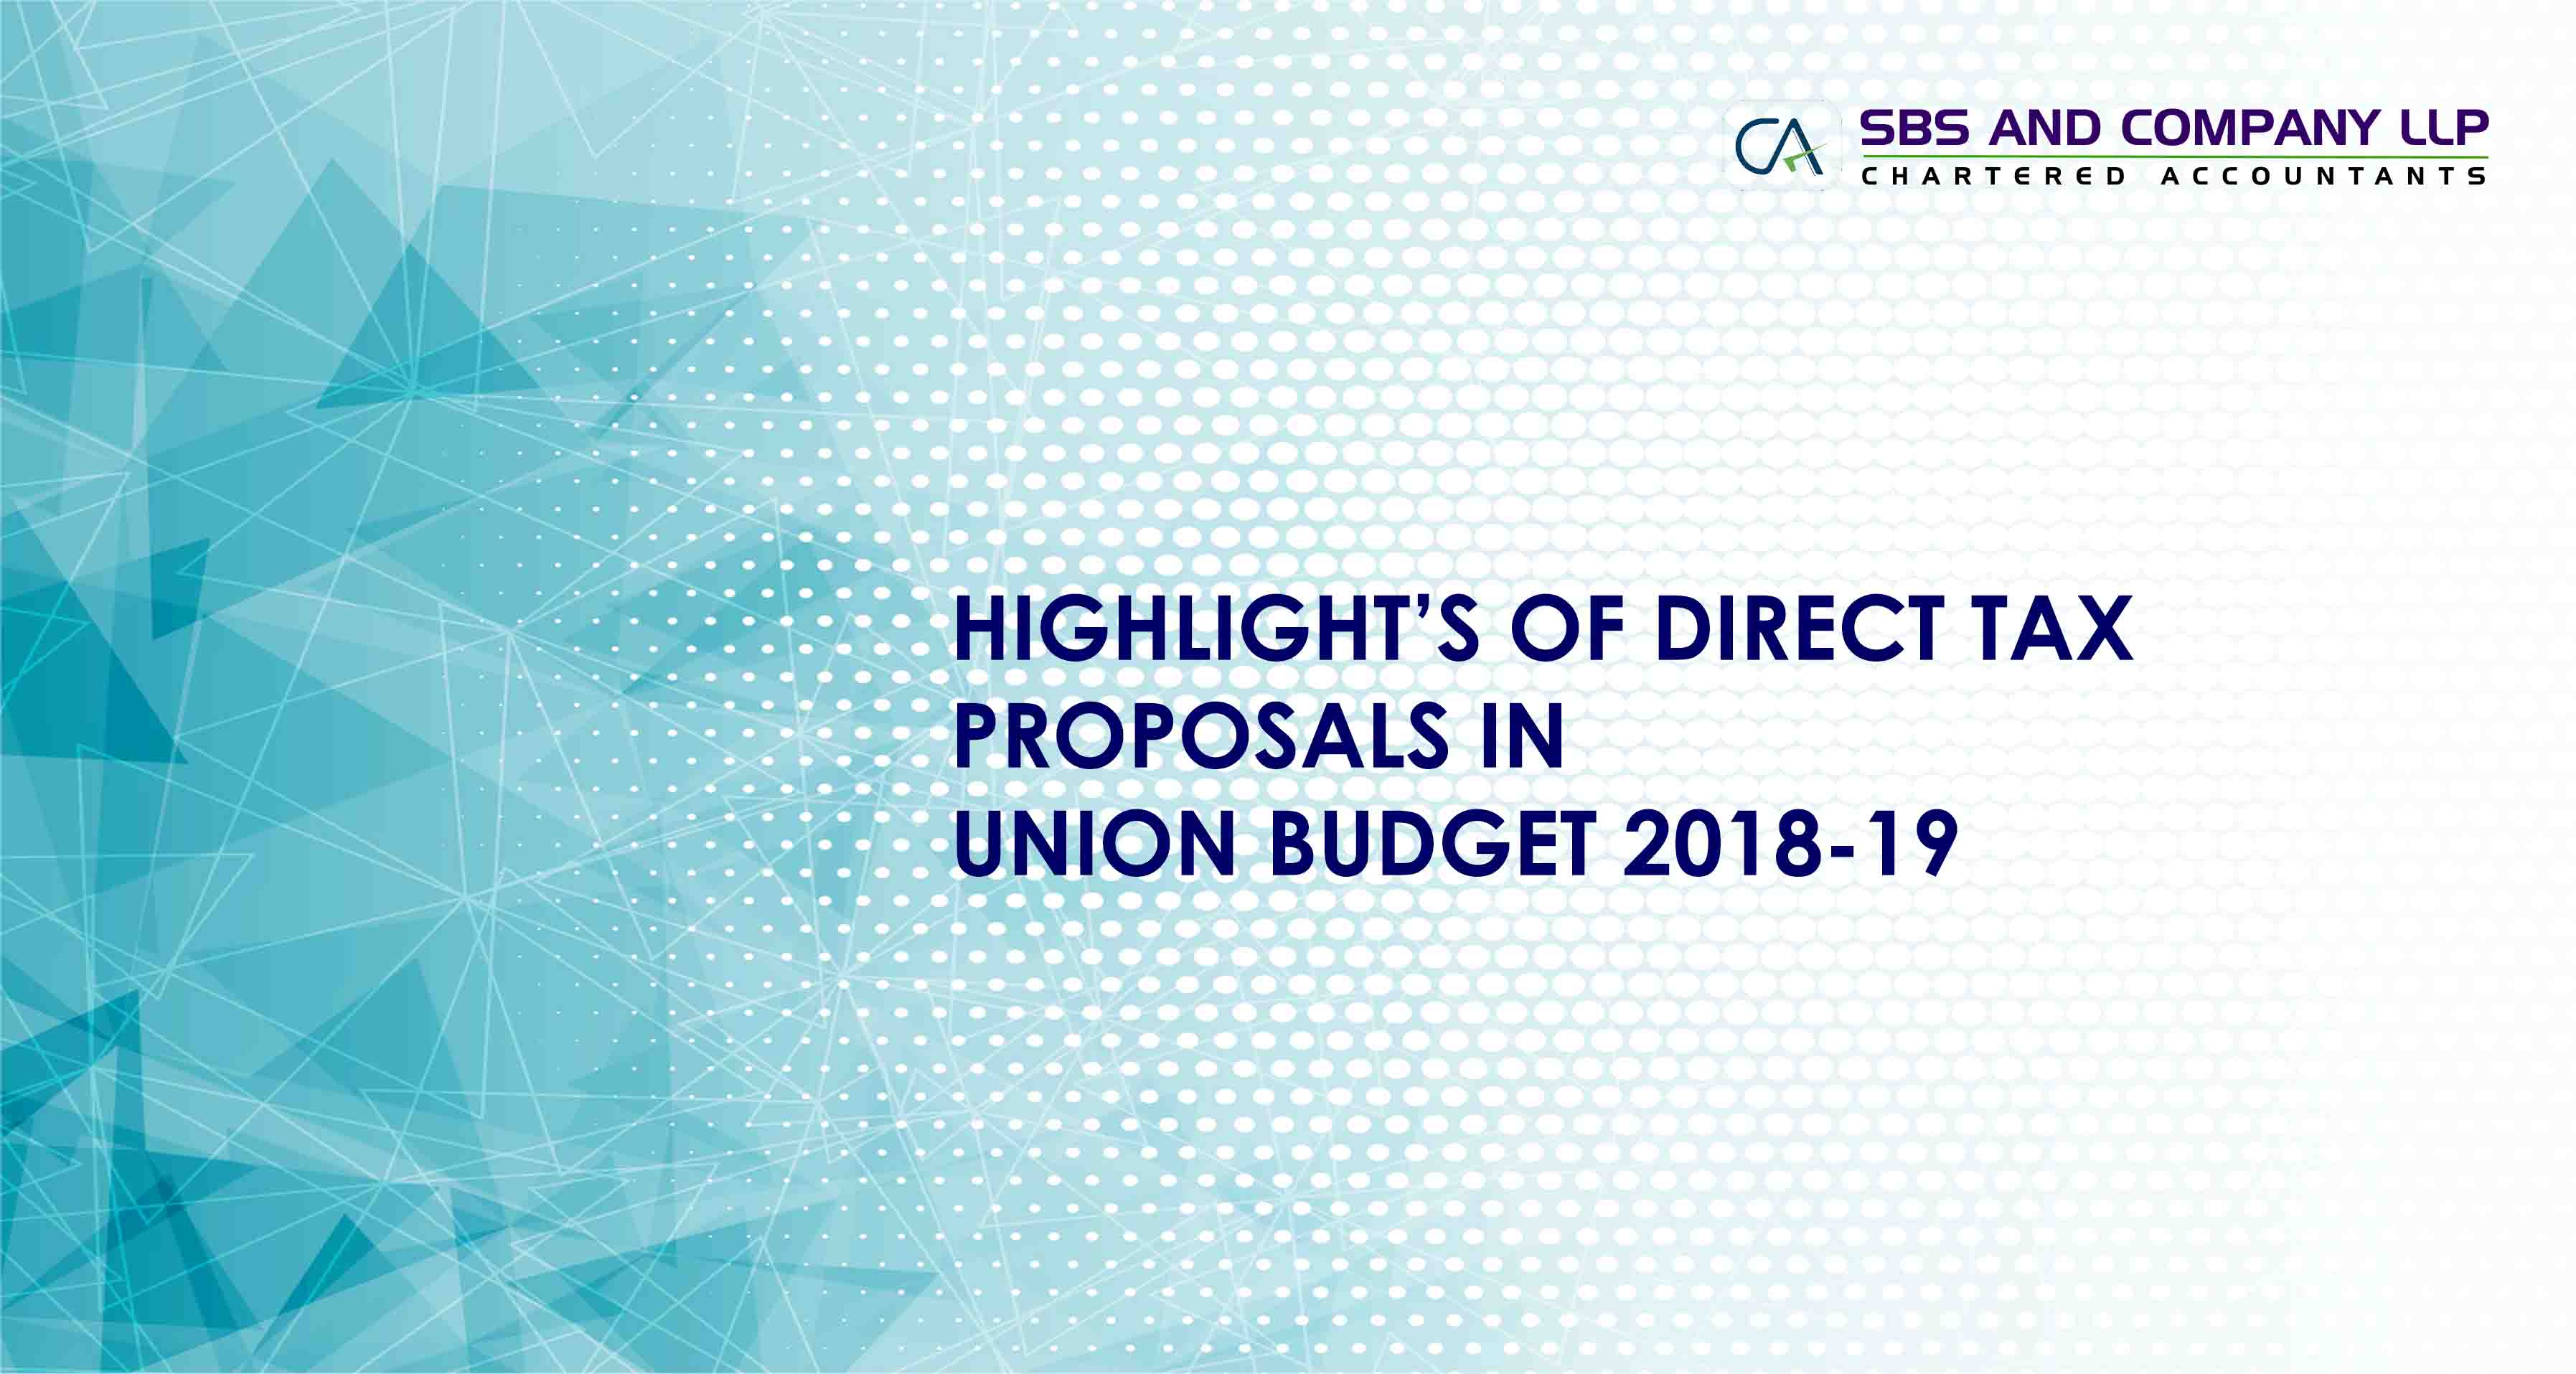 HIGHLIGHT’S OF DIRECT TAX PROPOSALS UNION BUDGET 2018-19